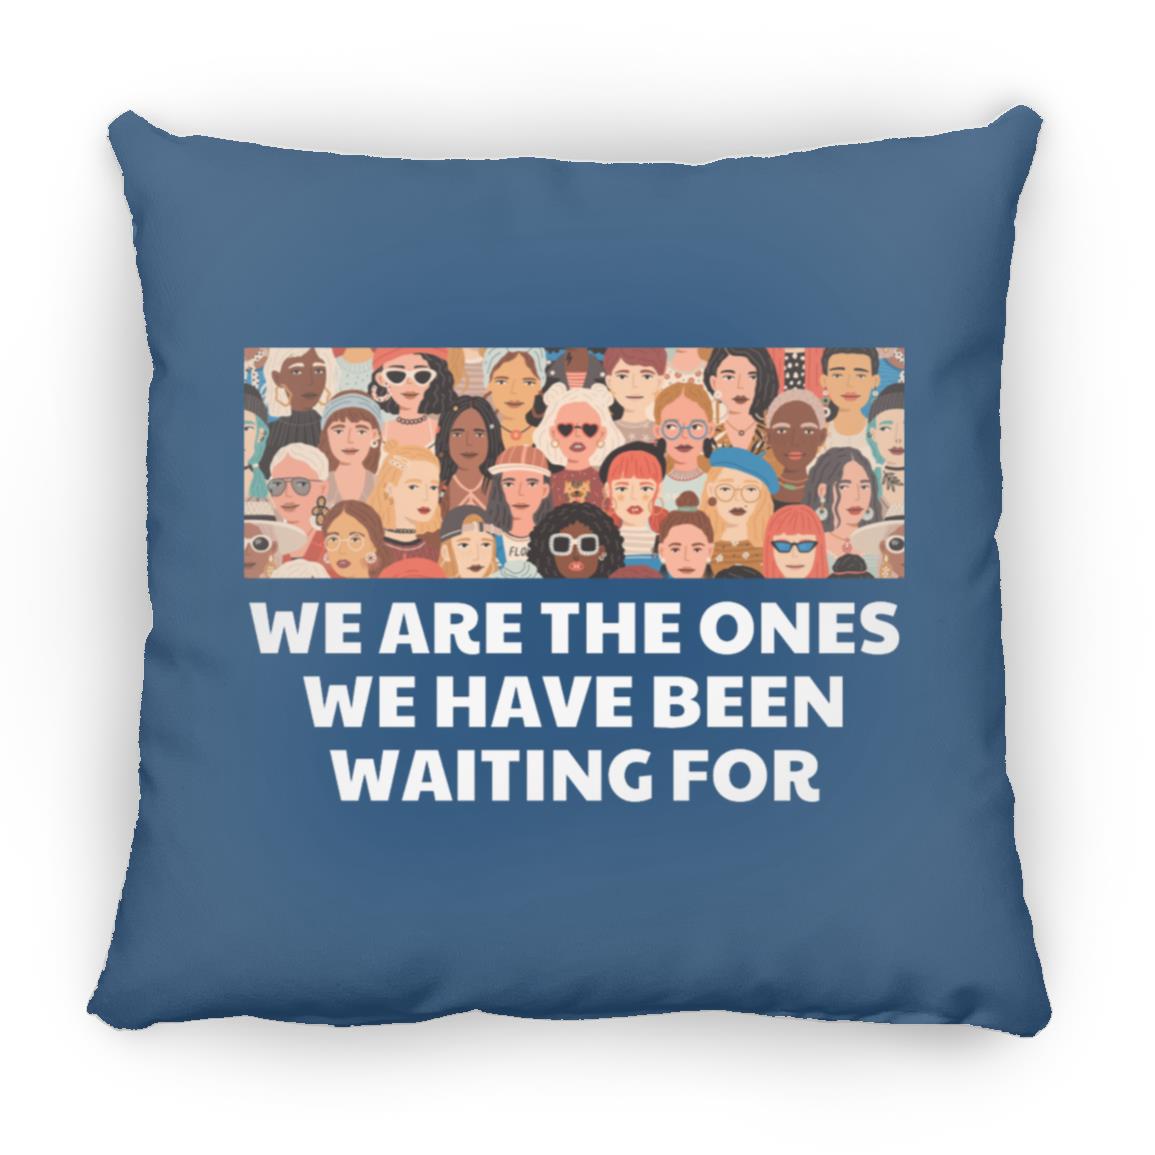 We Are The Ones We Have Been Waiting For Throw Pillow